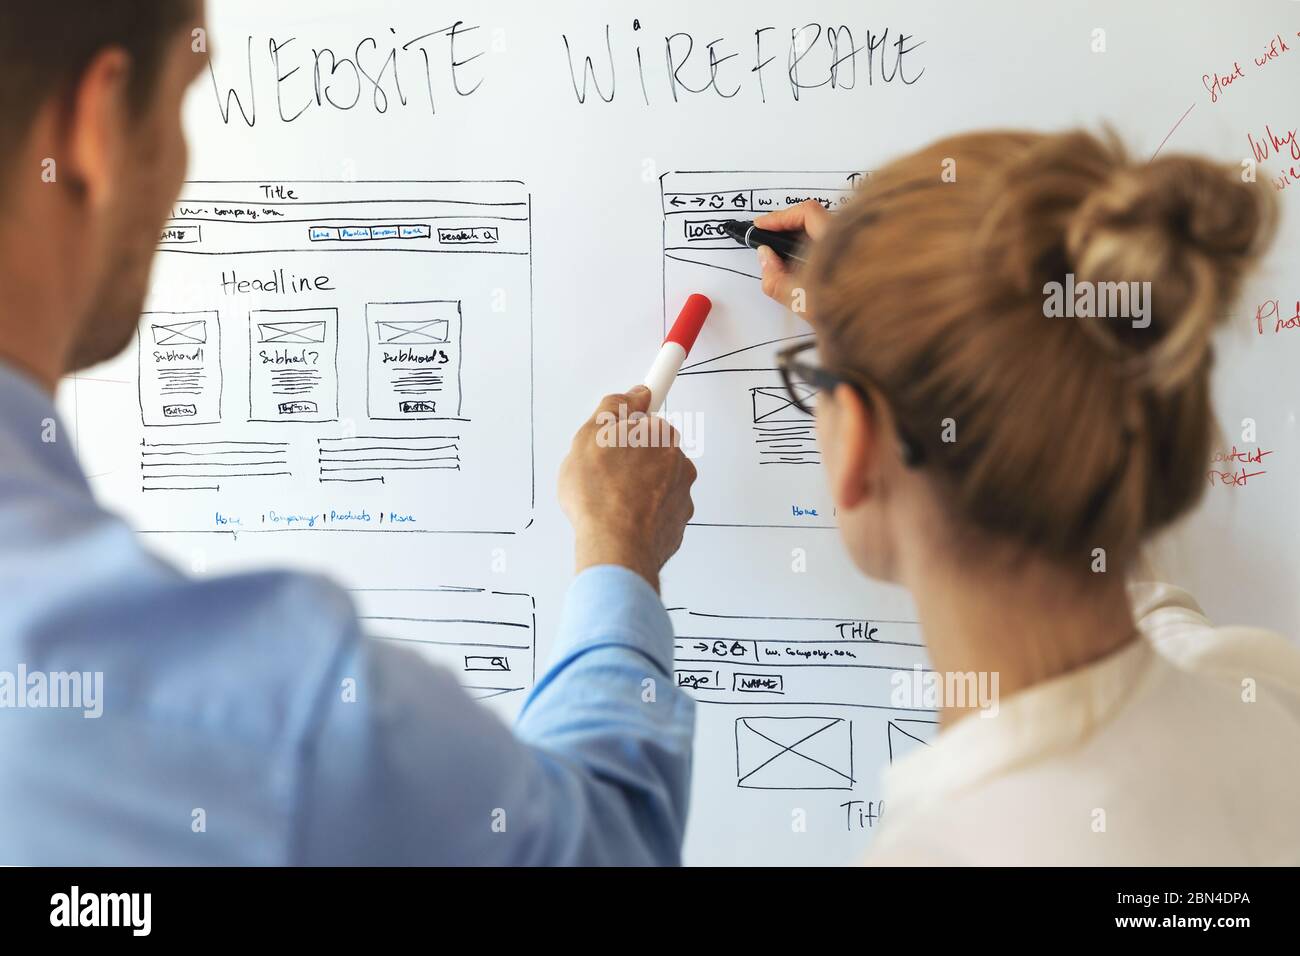 UI UX designers team working on new website wireframe in office Stock Photo